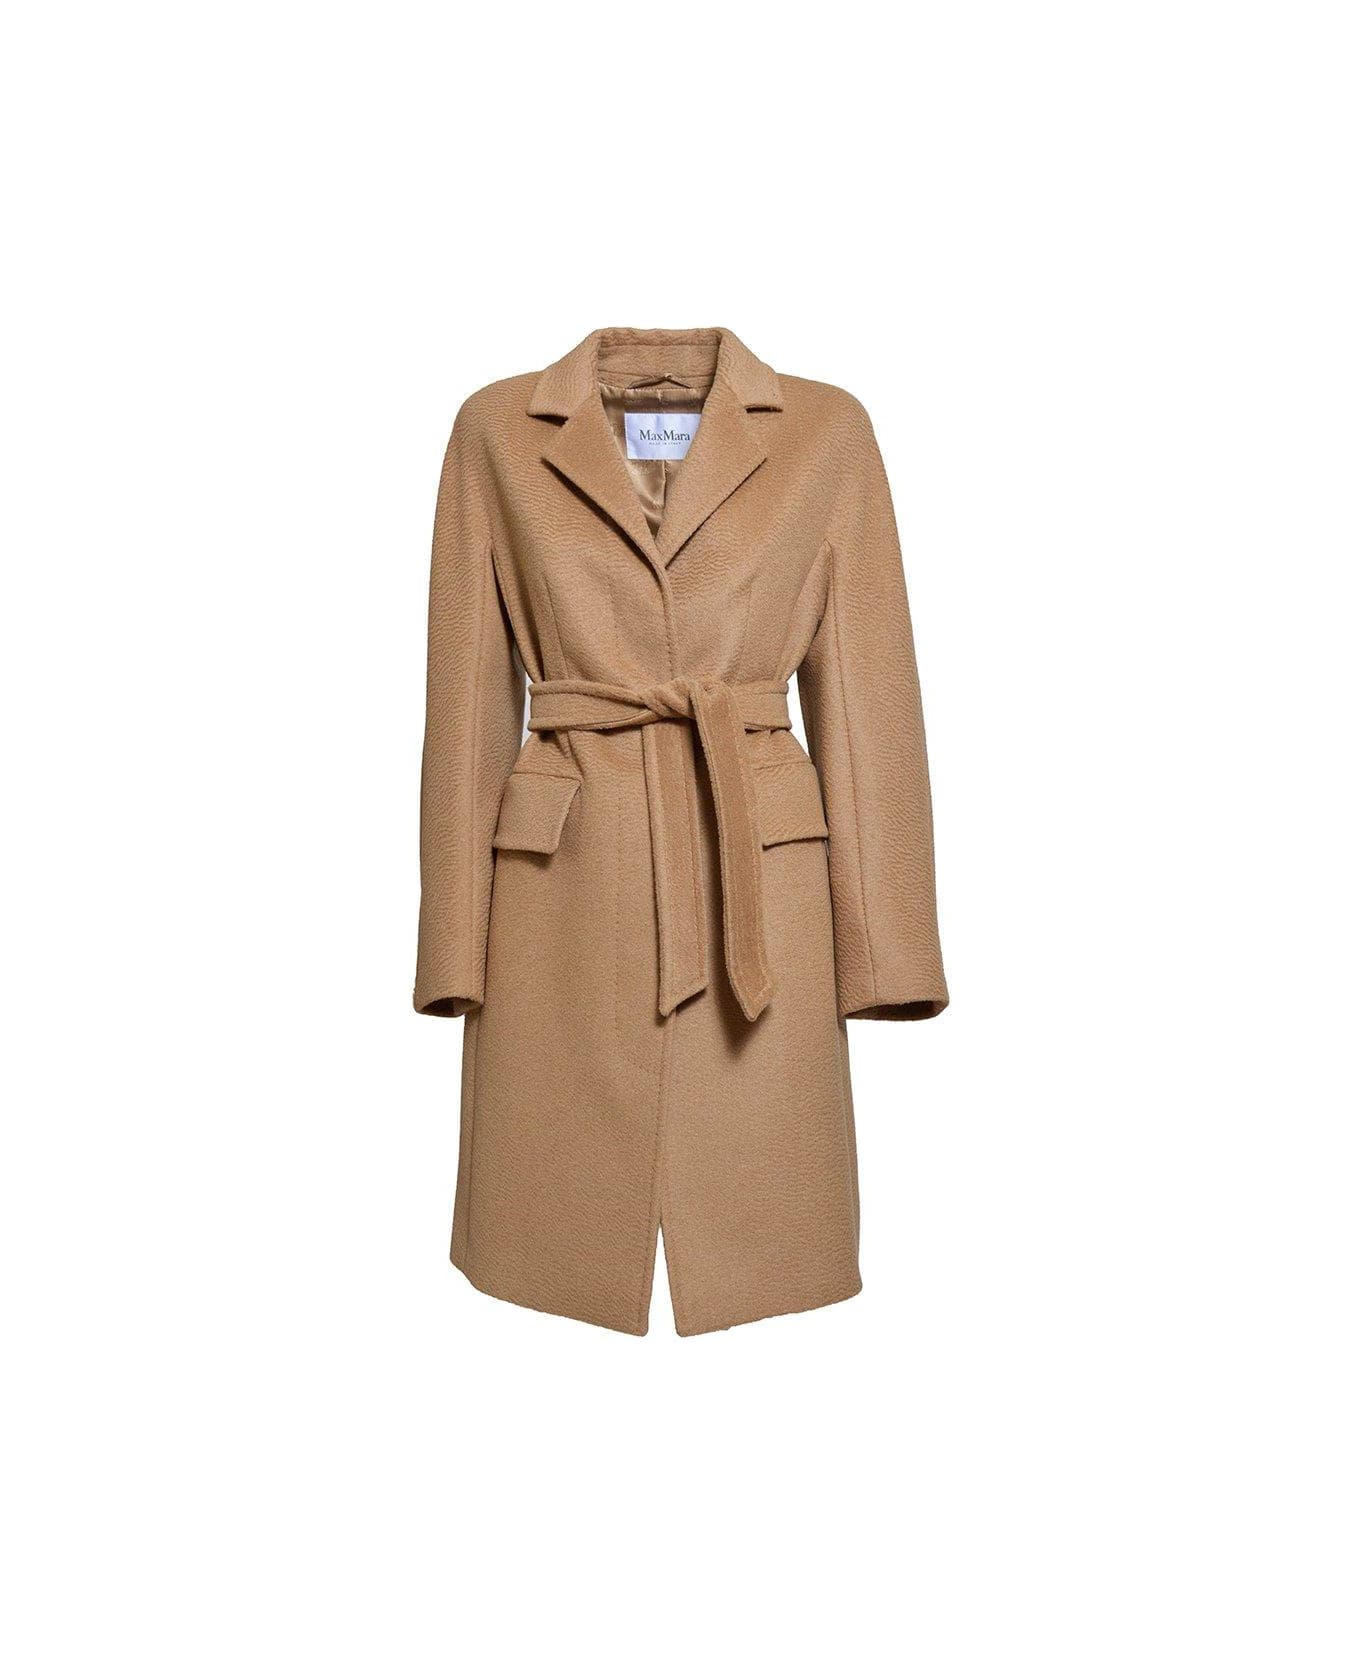 Max Mara Belted Long-sleeved Coat - Cammello